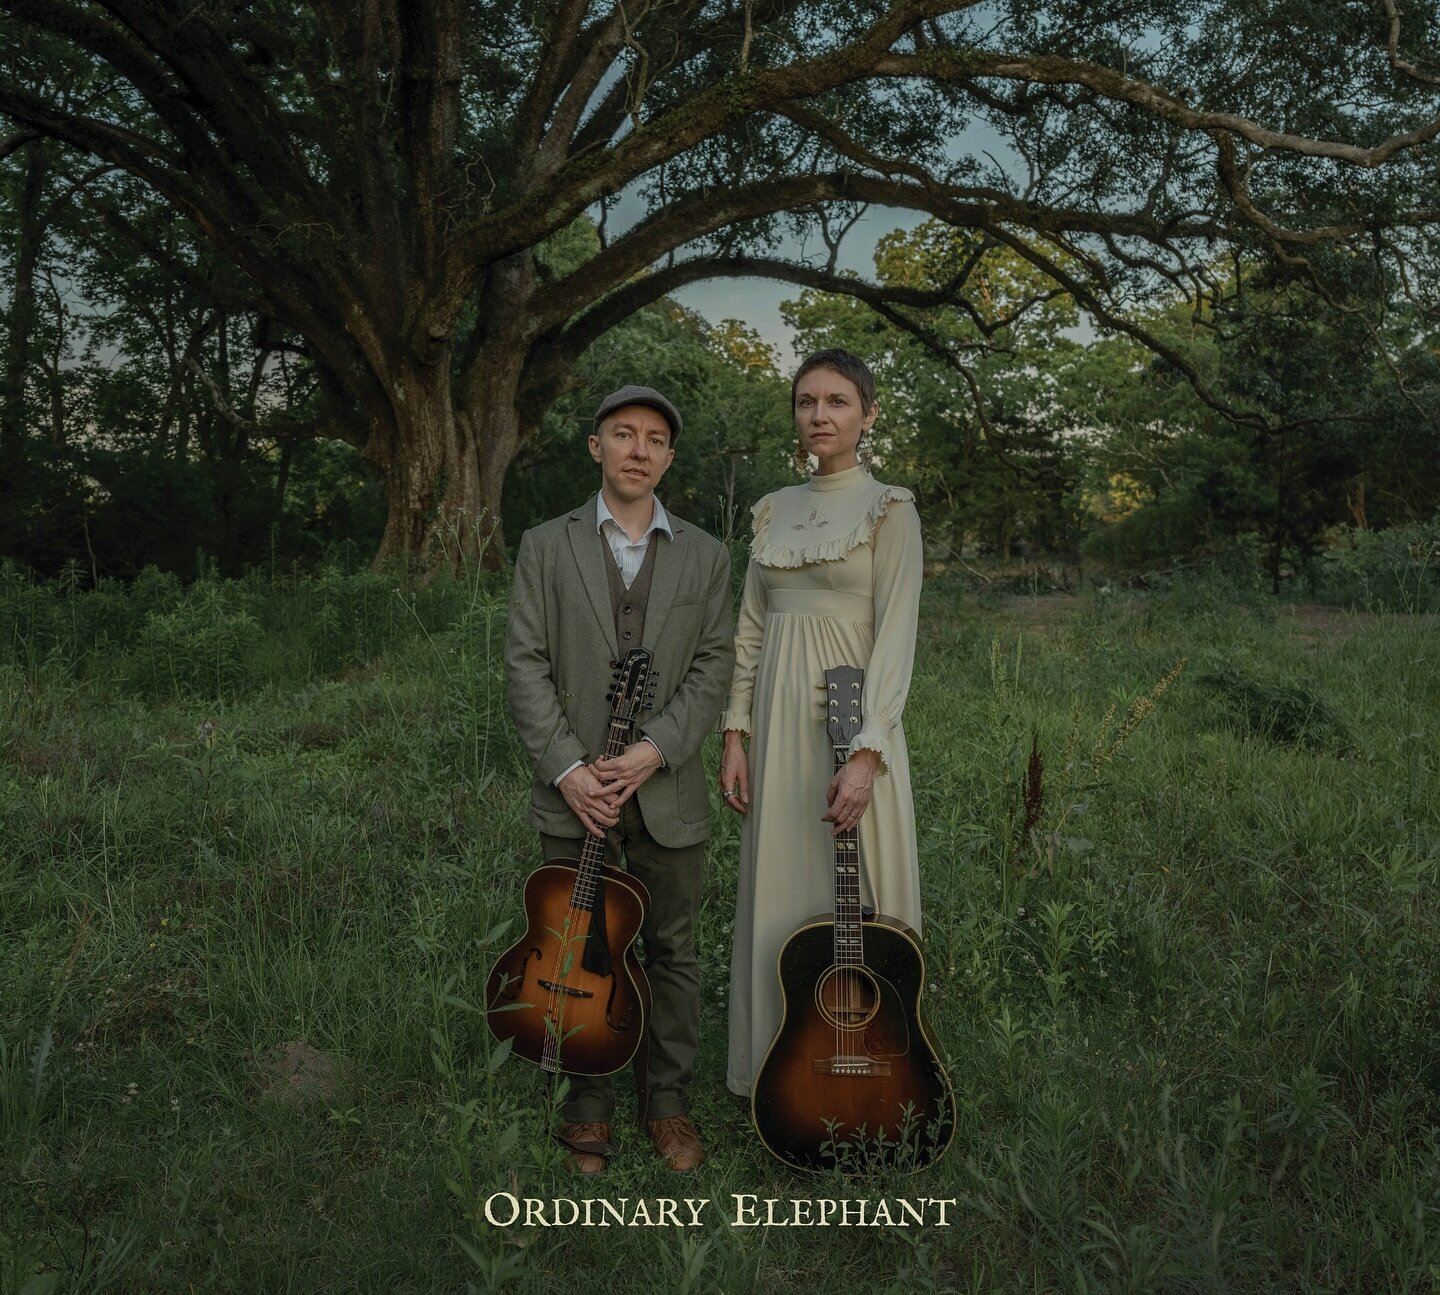 thrilled to announce the new album from @ordinaryelephant to be released on may 3rd on berkalin records : the first single + music video, relic of the rain, is available at the link in bio

produced by @dirkpowellofficial with photography + graphic d